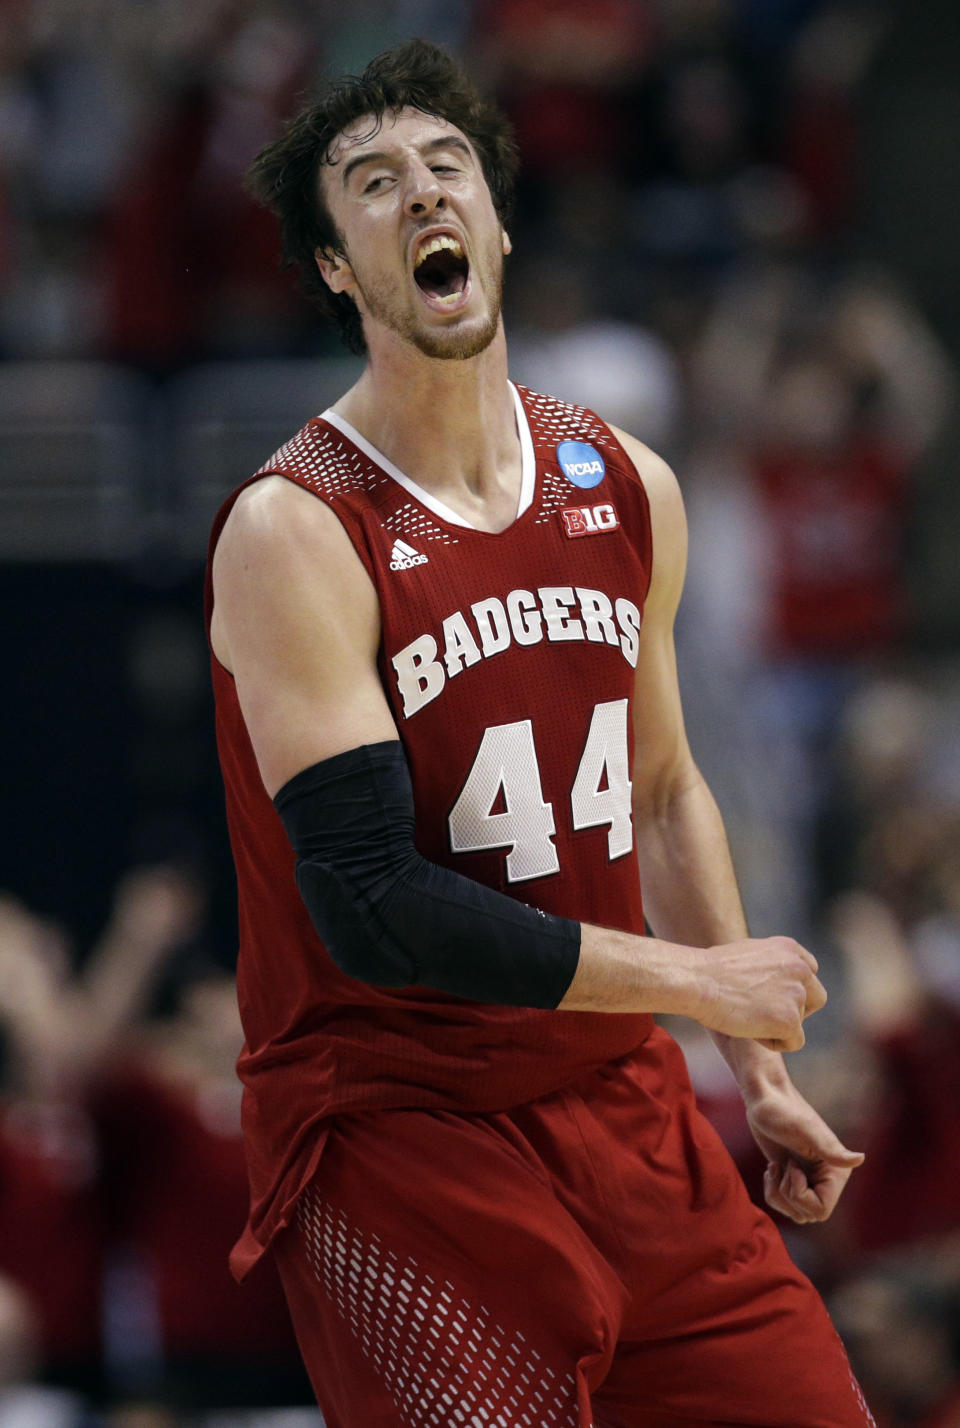 Wisconsin 's Frank Kaminsky reacts after making a three-point basket during the second half in a regional final NCAA college basketball tournament game against Arizona, Saturday, March 29, 2014, in Anaheim, Calif. (AP Photo/Jae C. Hong)